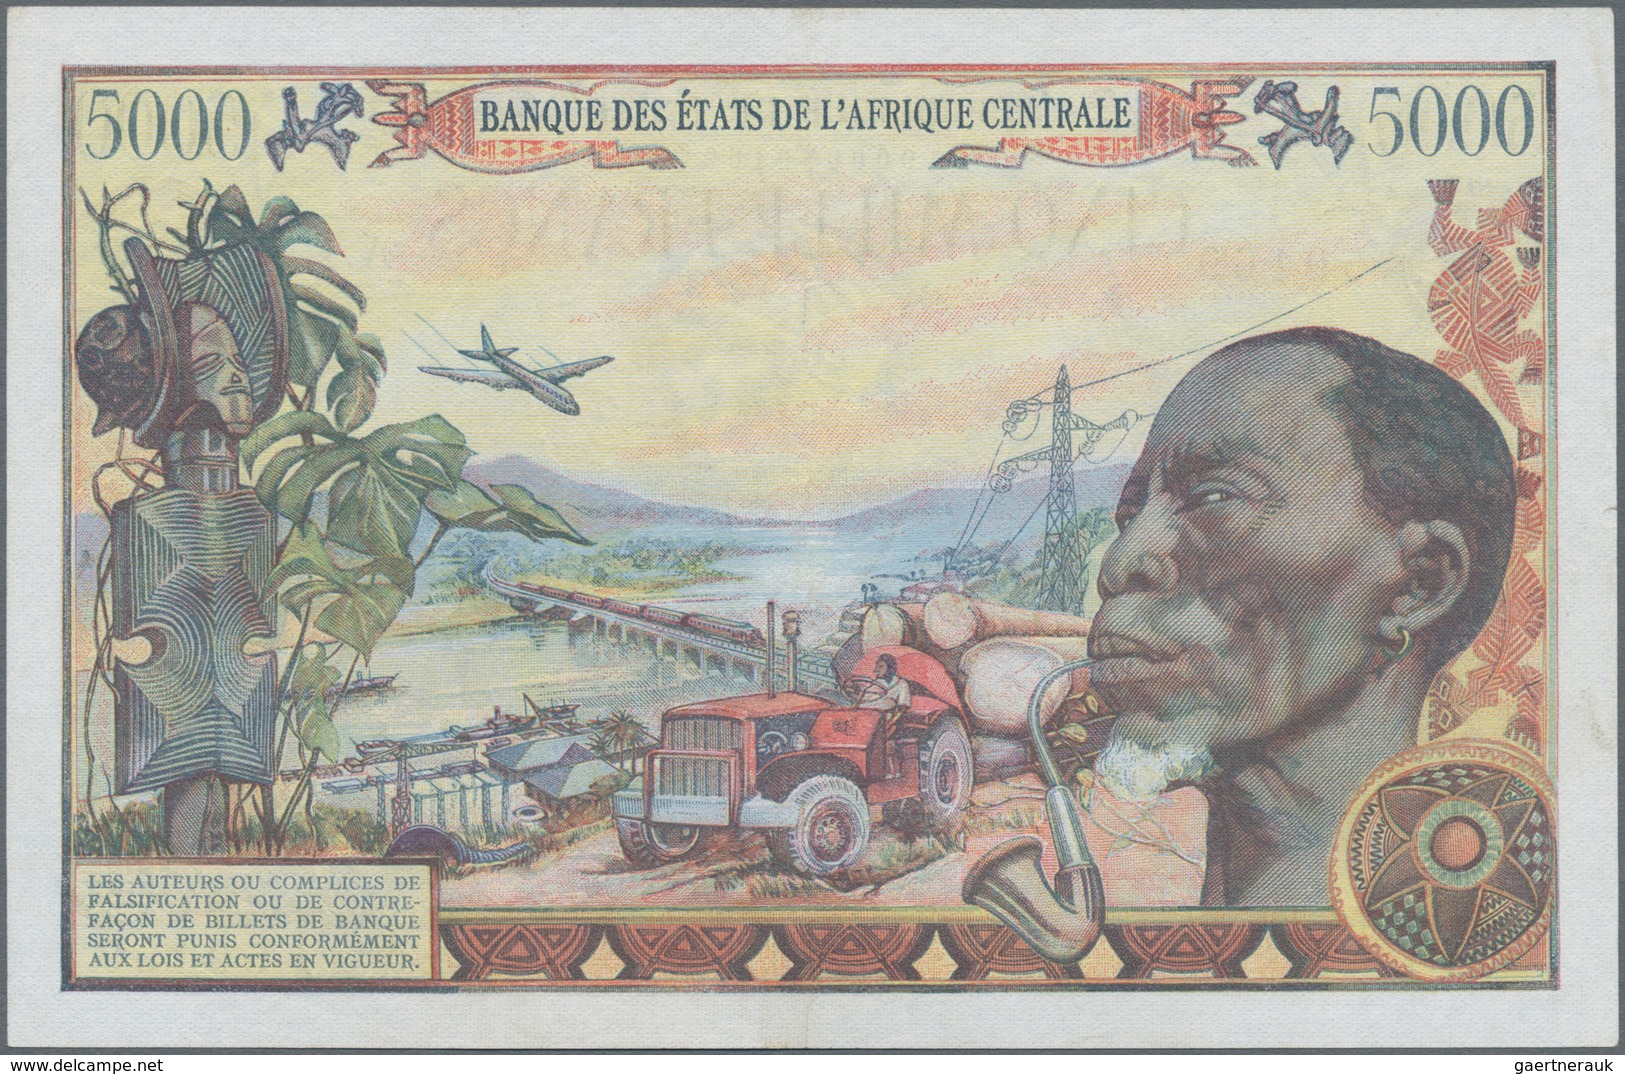 Chad / Tschad: Republique Du Tchad 5000 Francs 1980, P.8, Very Popular And Rare Note In Excellent Co - Tsjaad